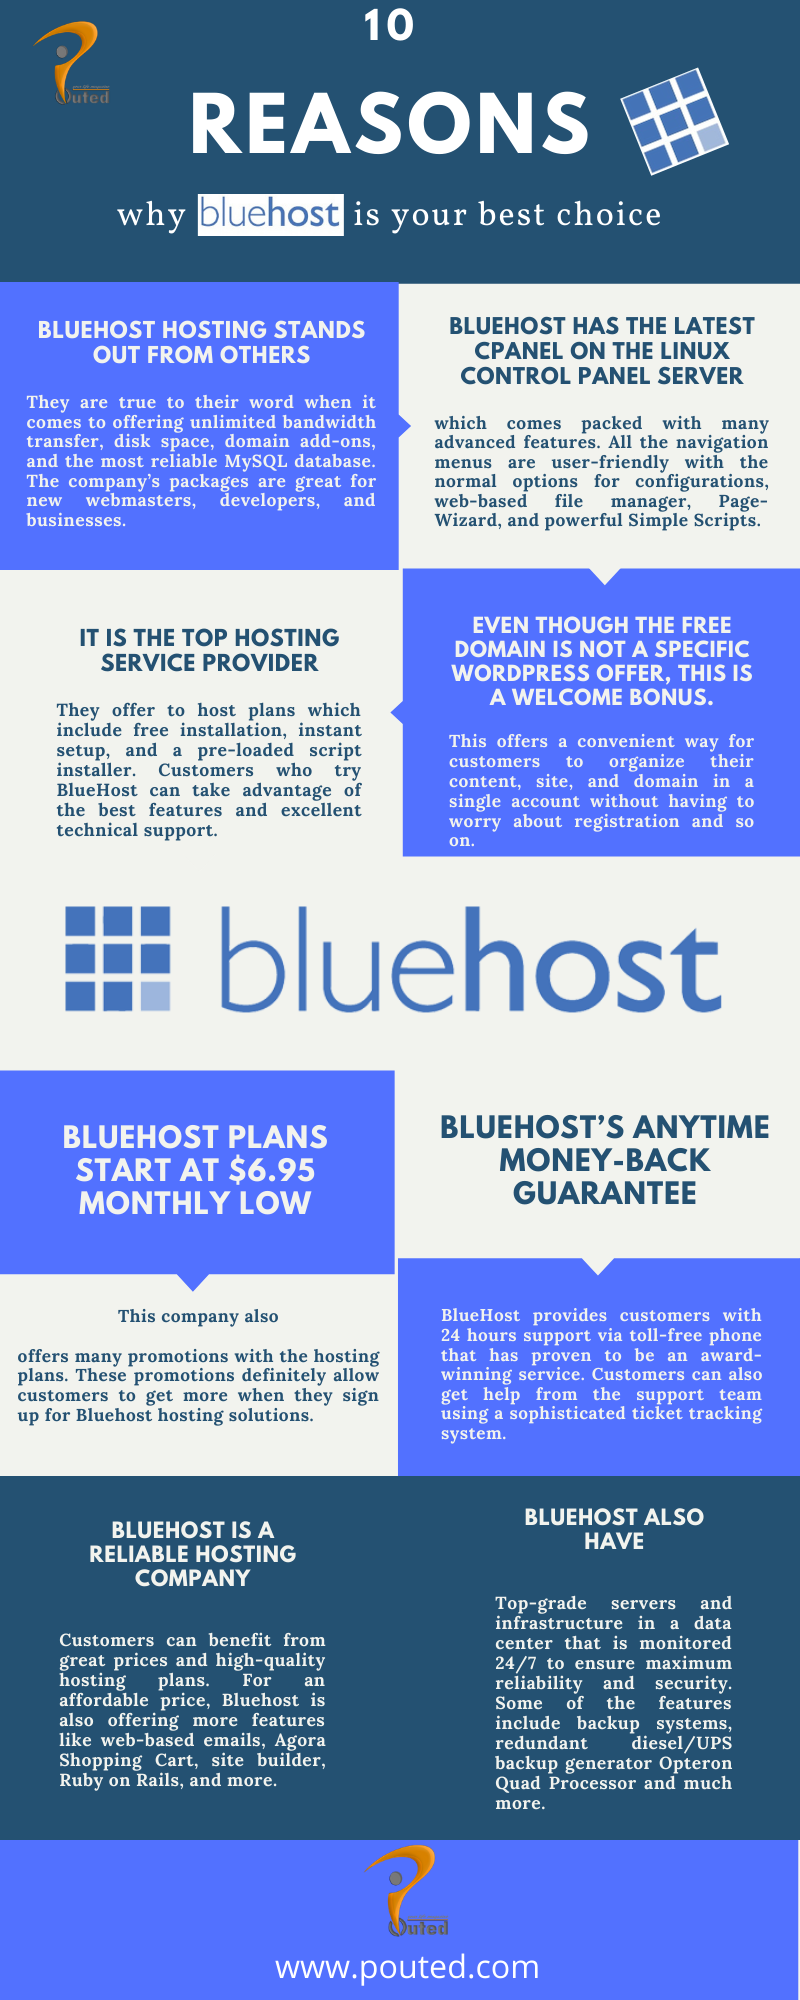 Bluehost_review Bluehost Review 2021: Cons & Pros and Hidden Fees To Know